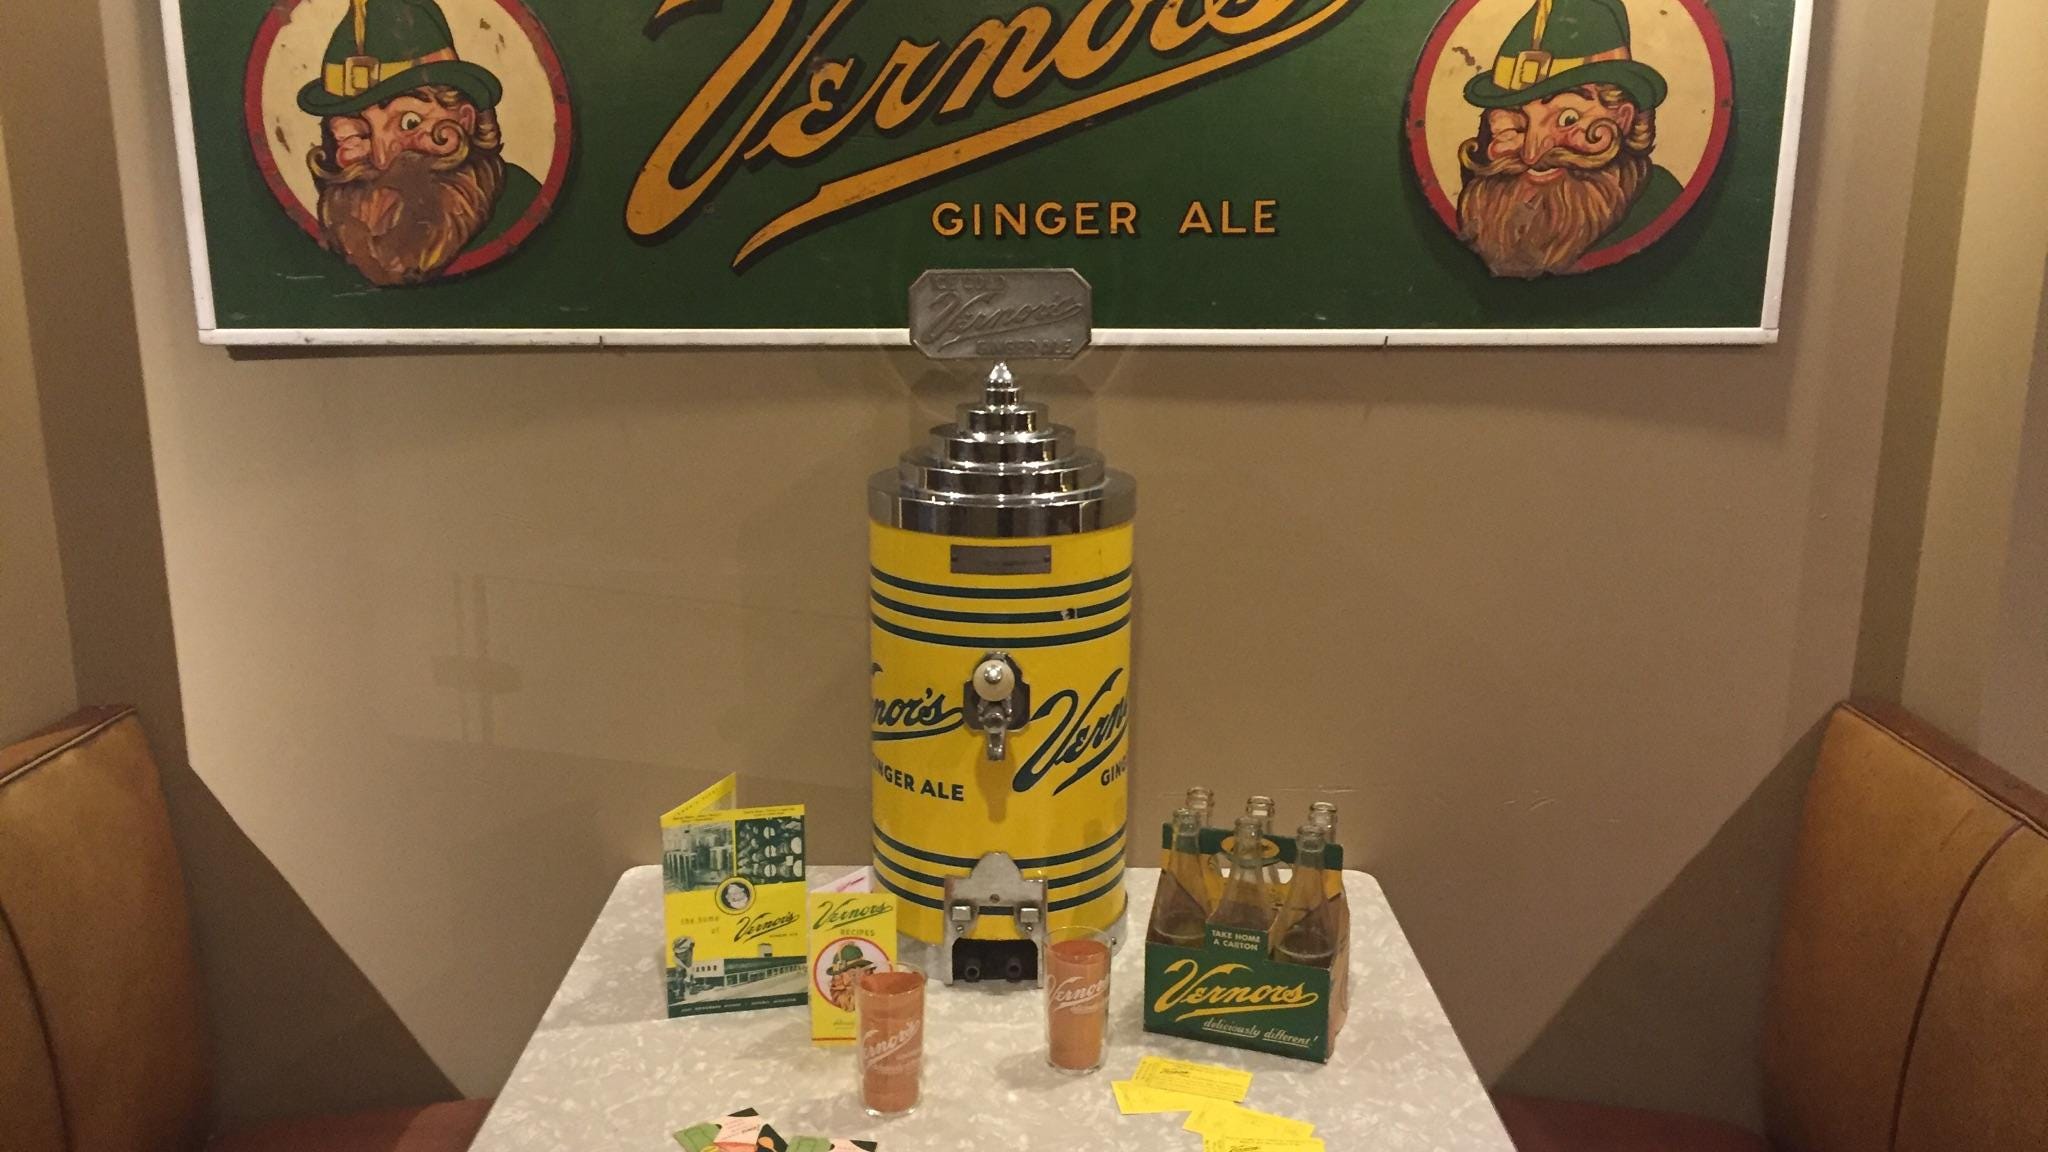 Vernors memorabilia on display at the Detroit Historical Museum.